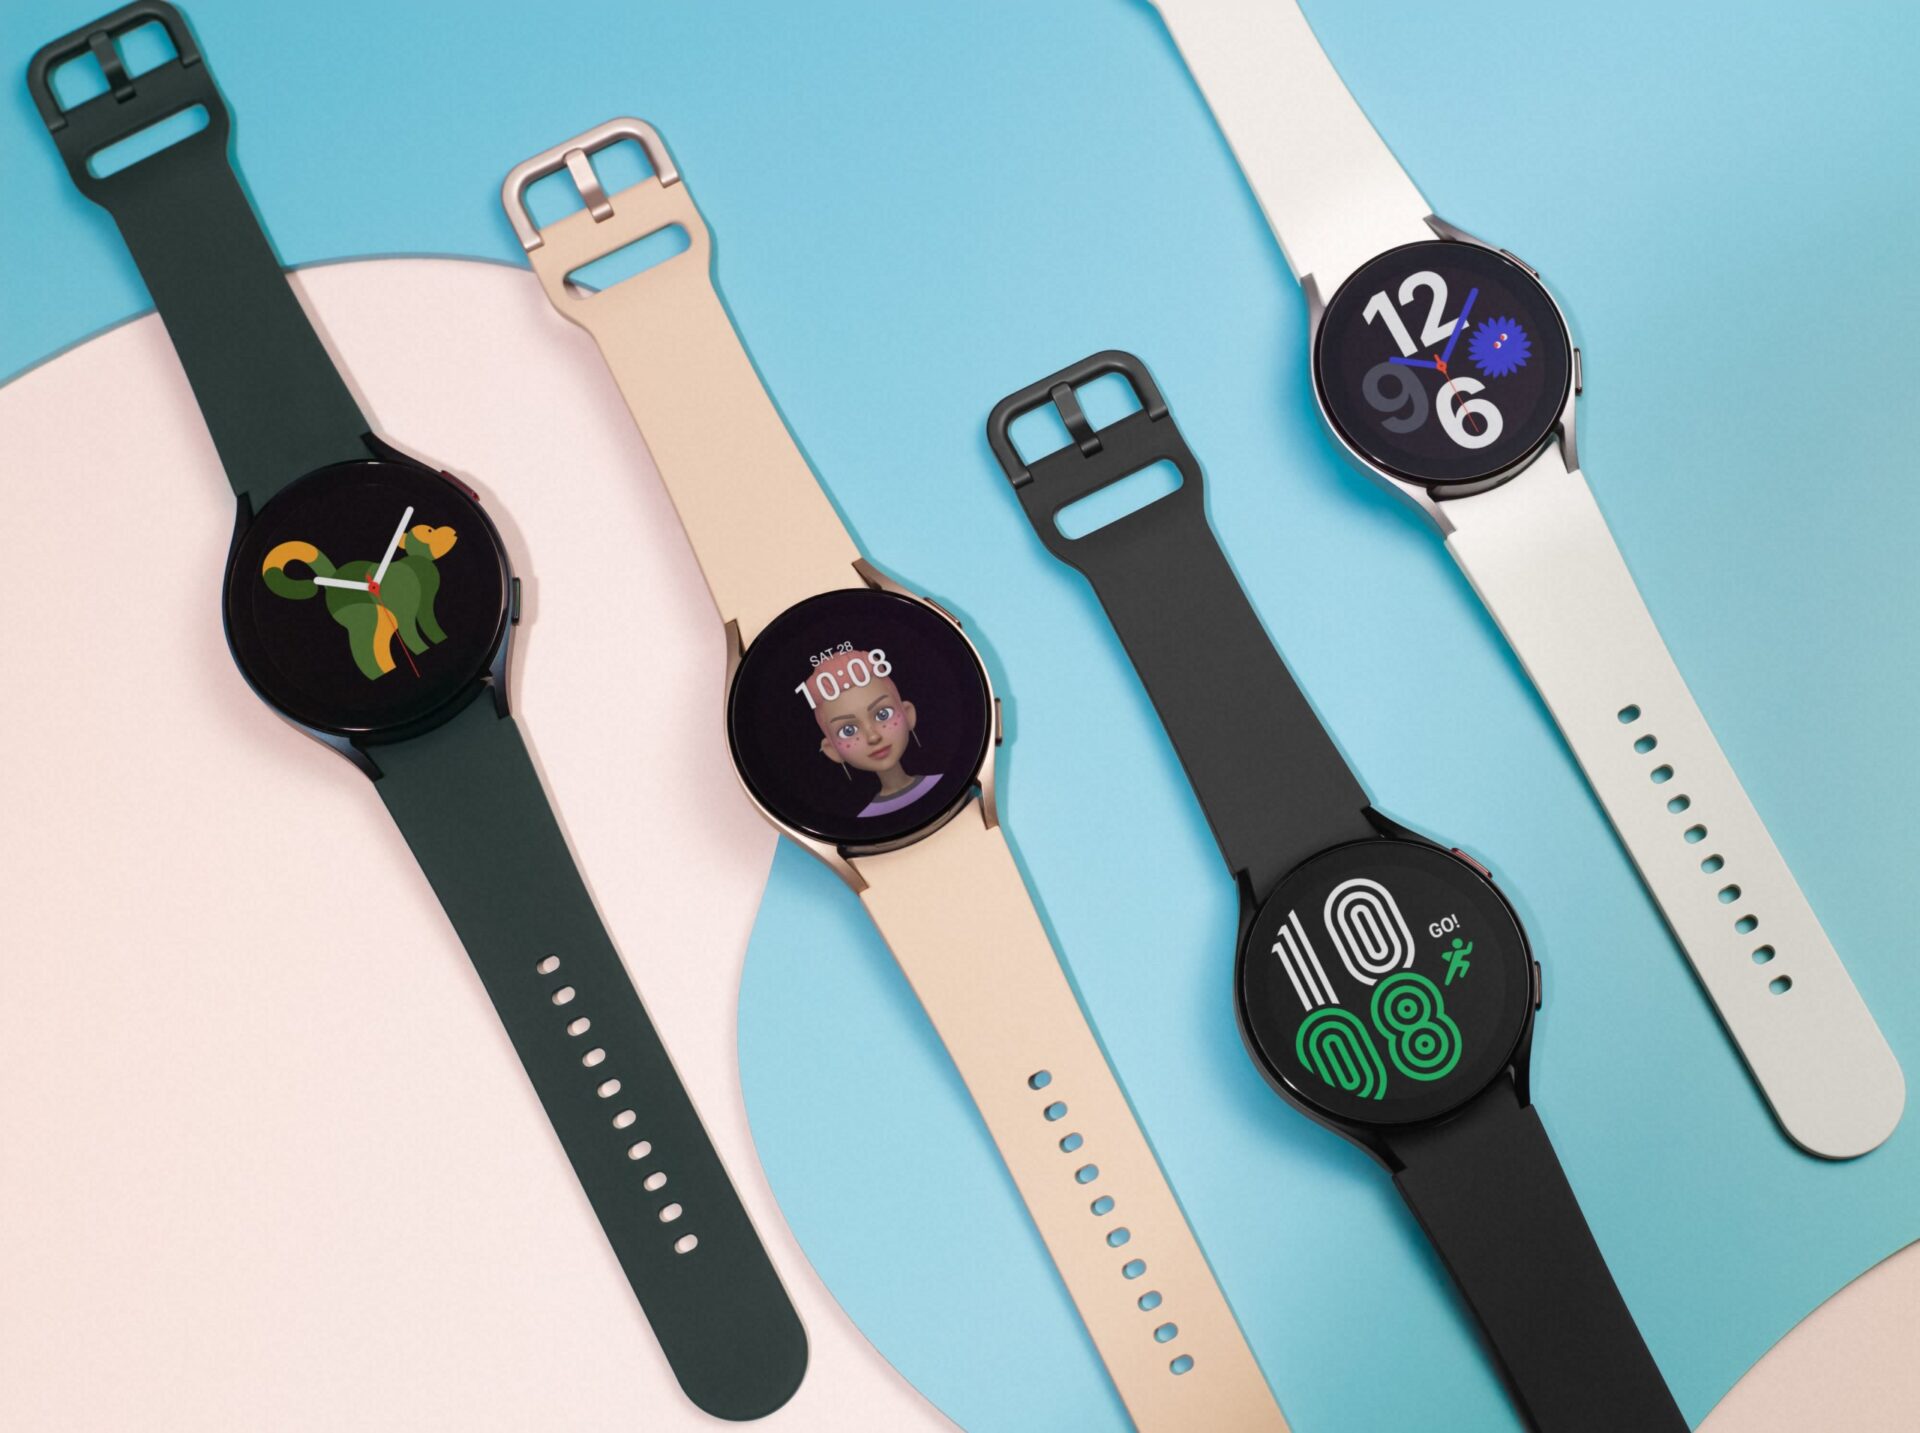 Samsung Galaxy Watch 4 & Watch 4 Classic is now official with 